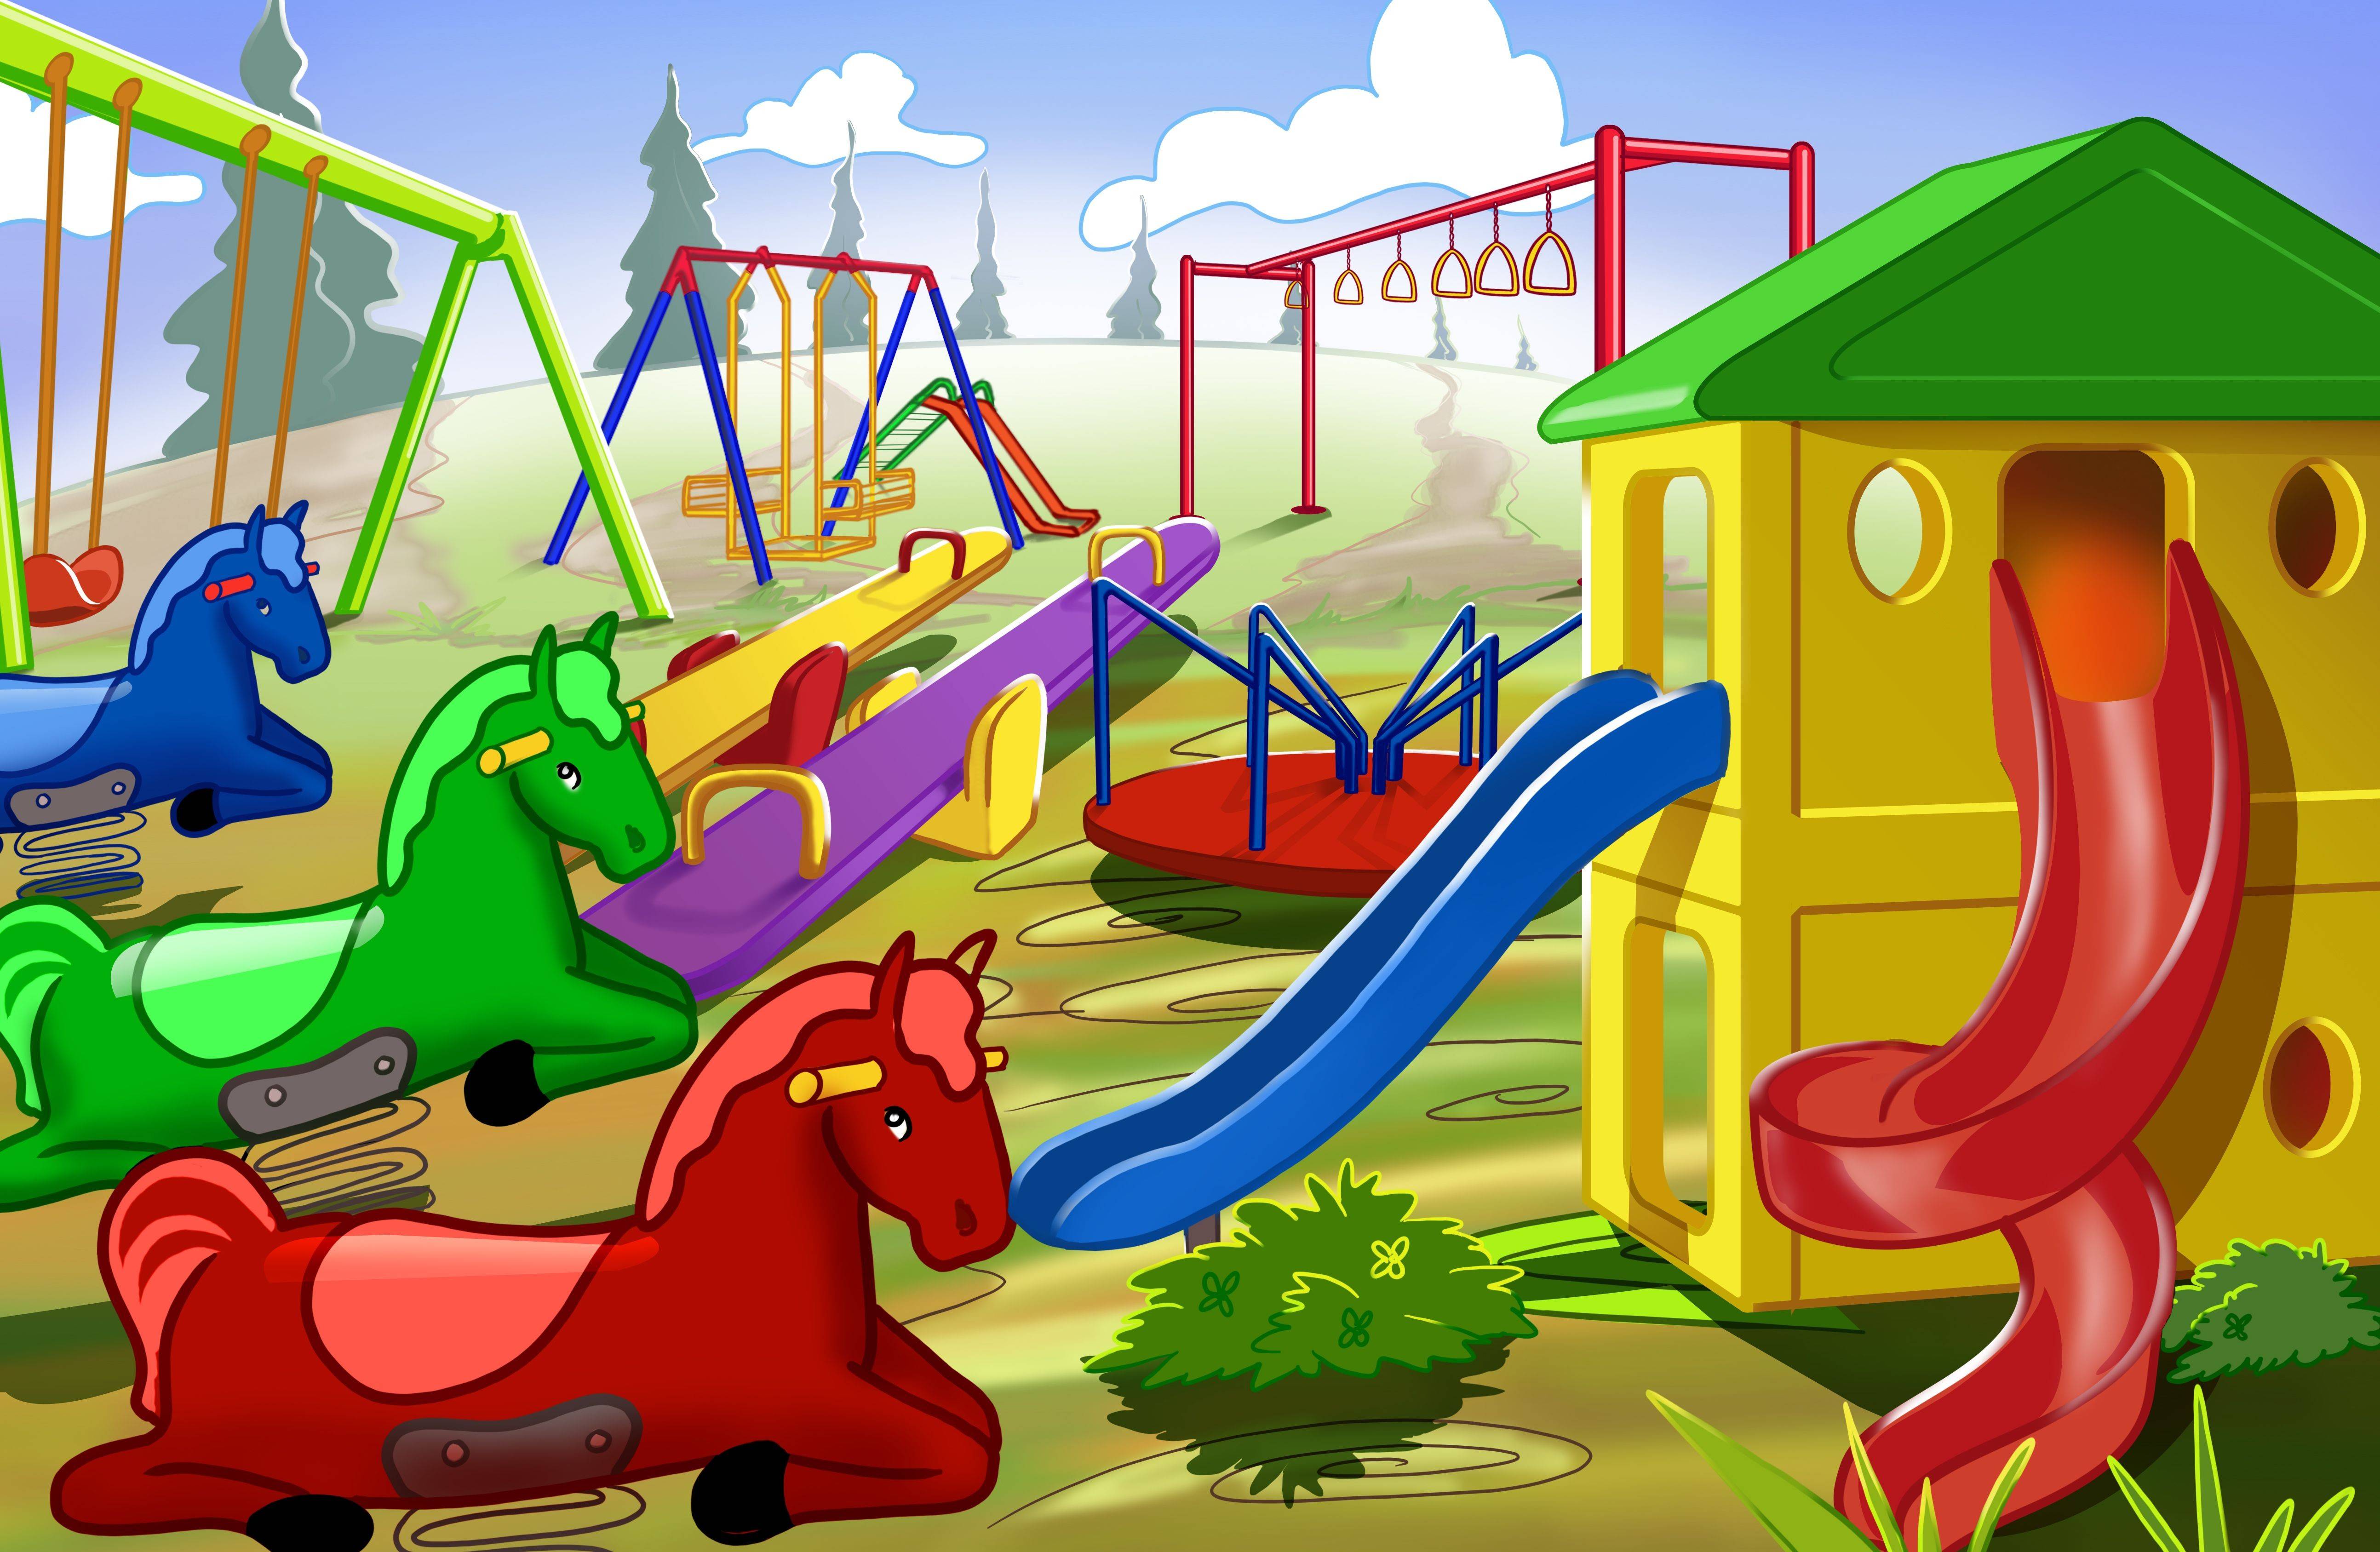 Playground Slide Wallpapers - Wallpaper Cave